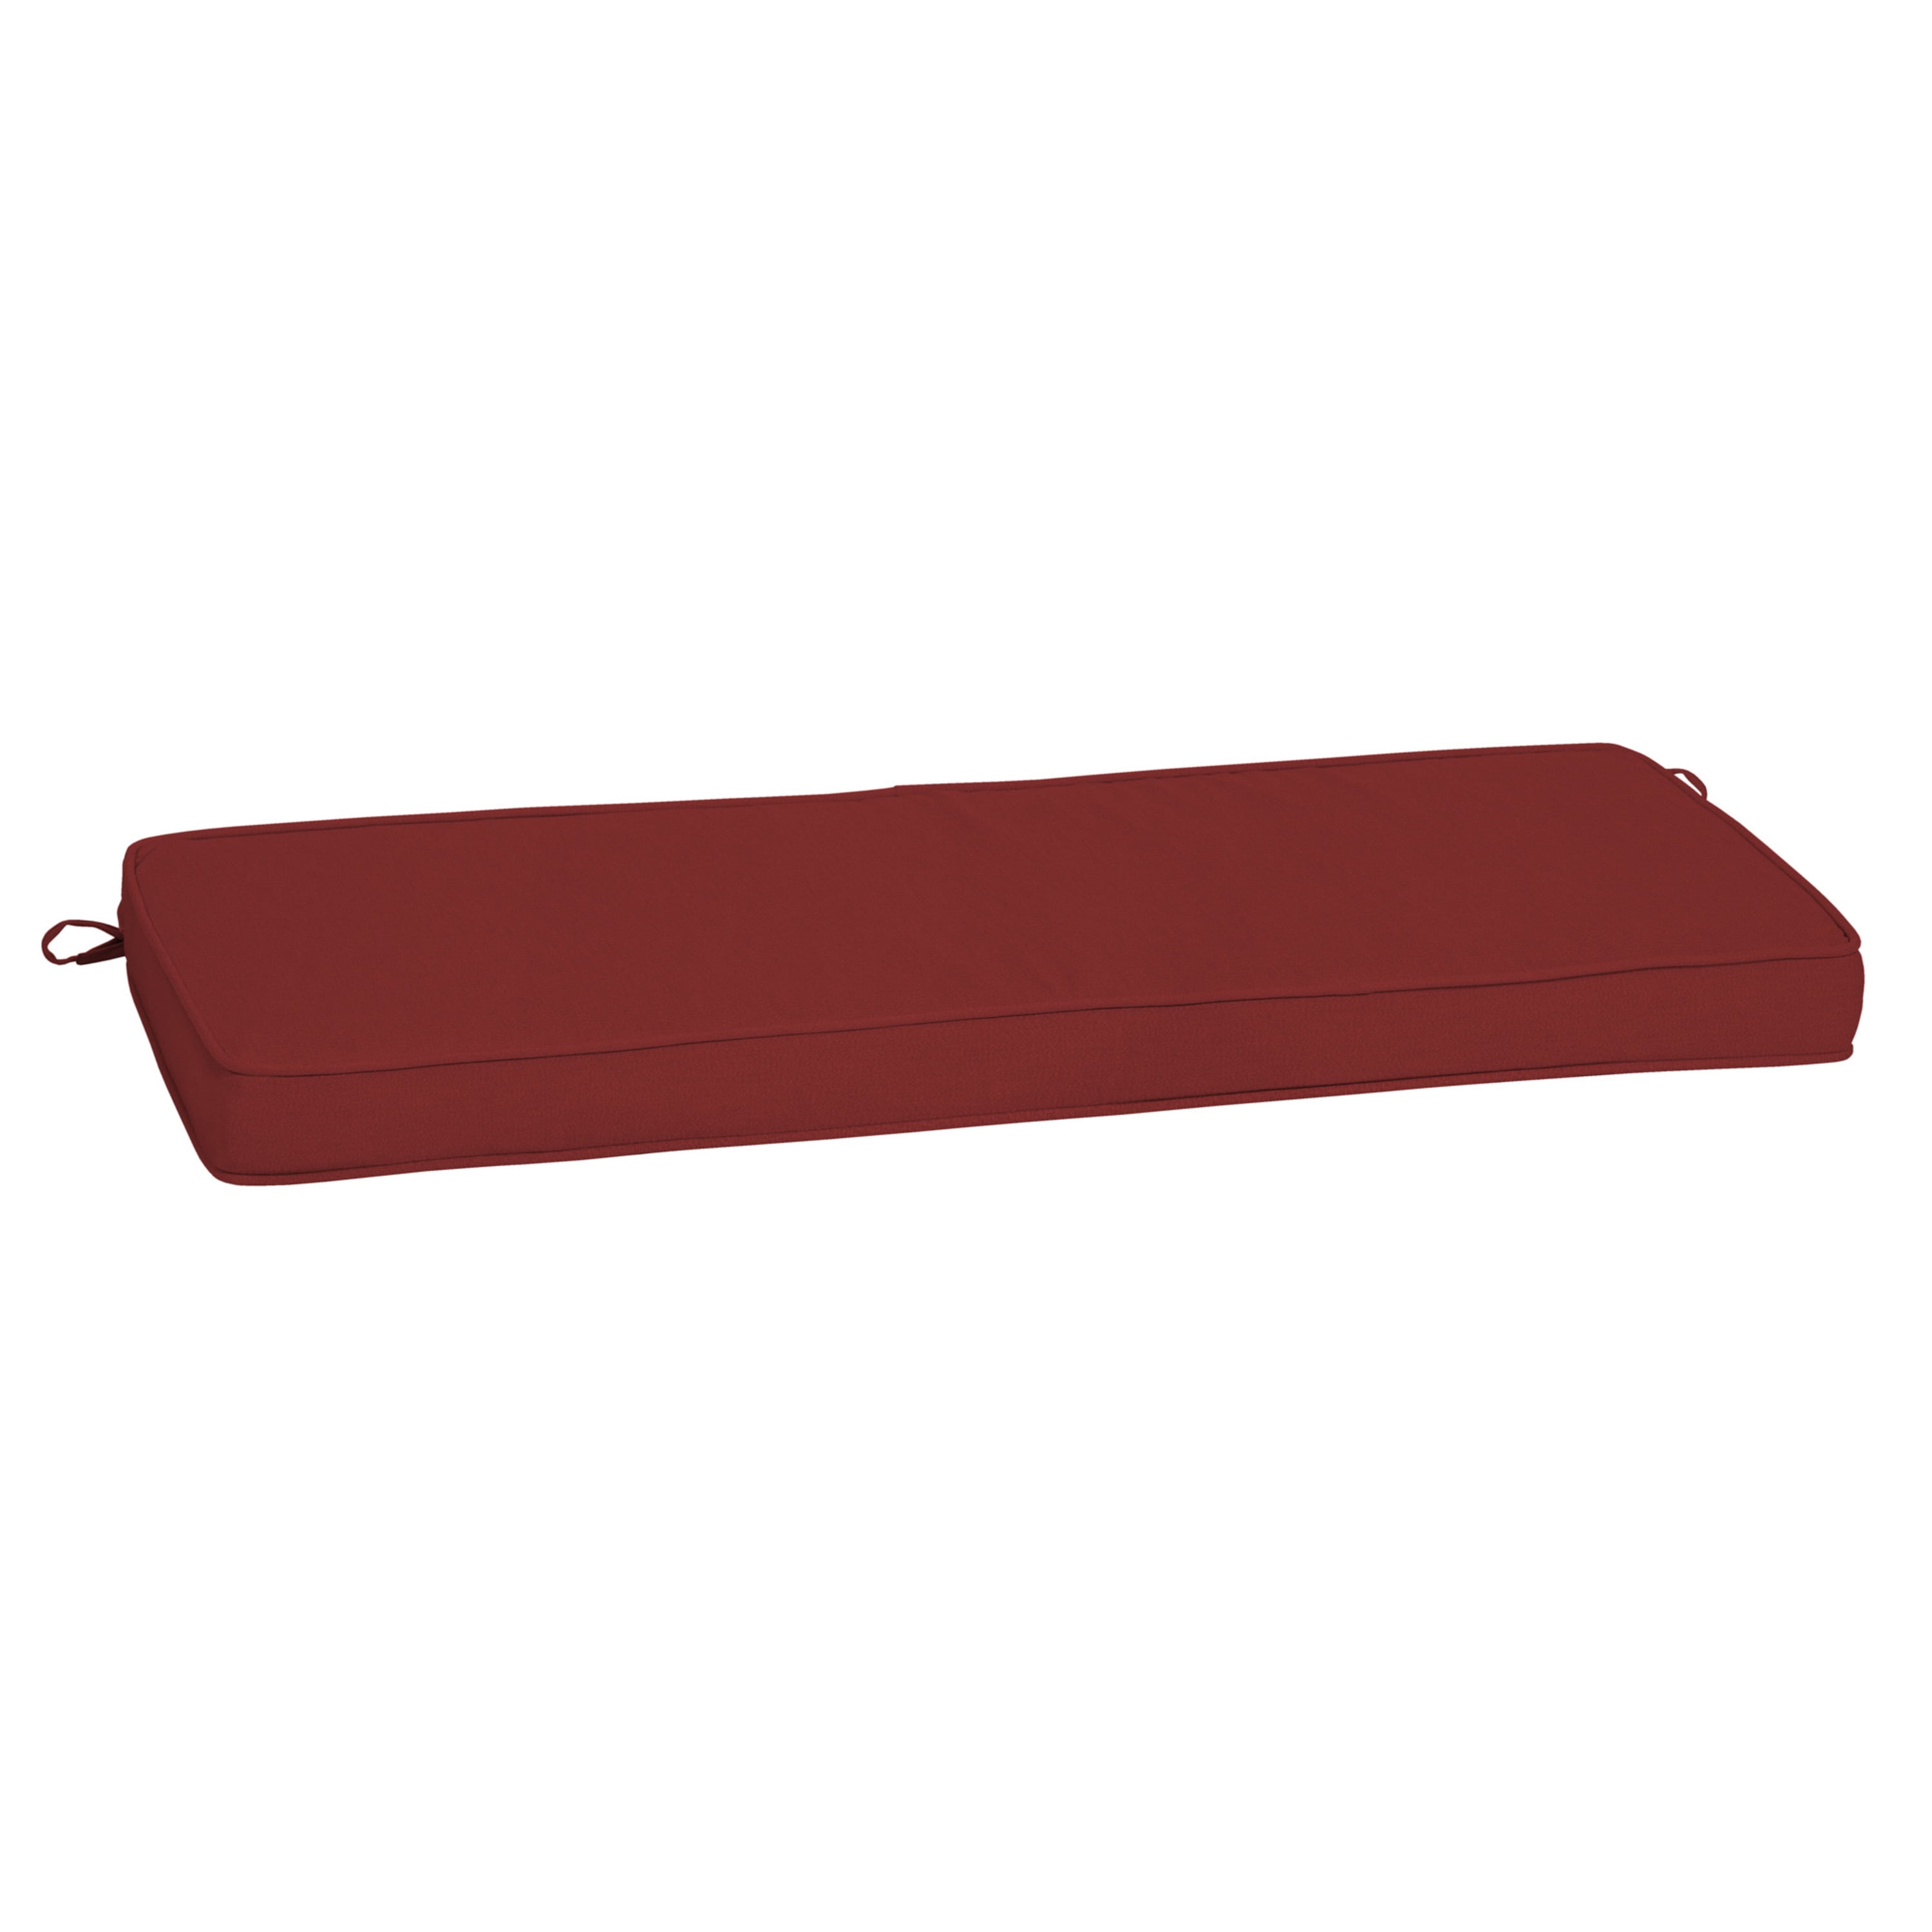 Bench Cushion Seat Mat Maroon Outdoor Comfortable 17 in H L x 47 in W x 3 in 